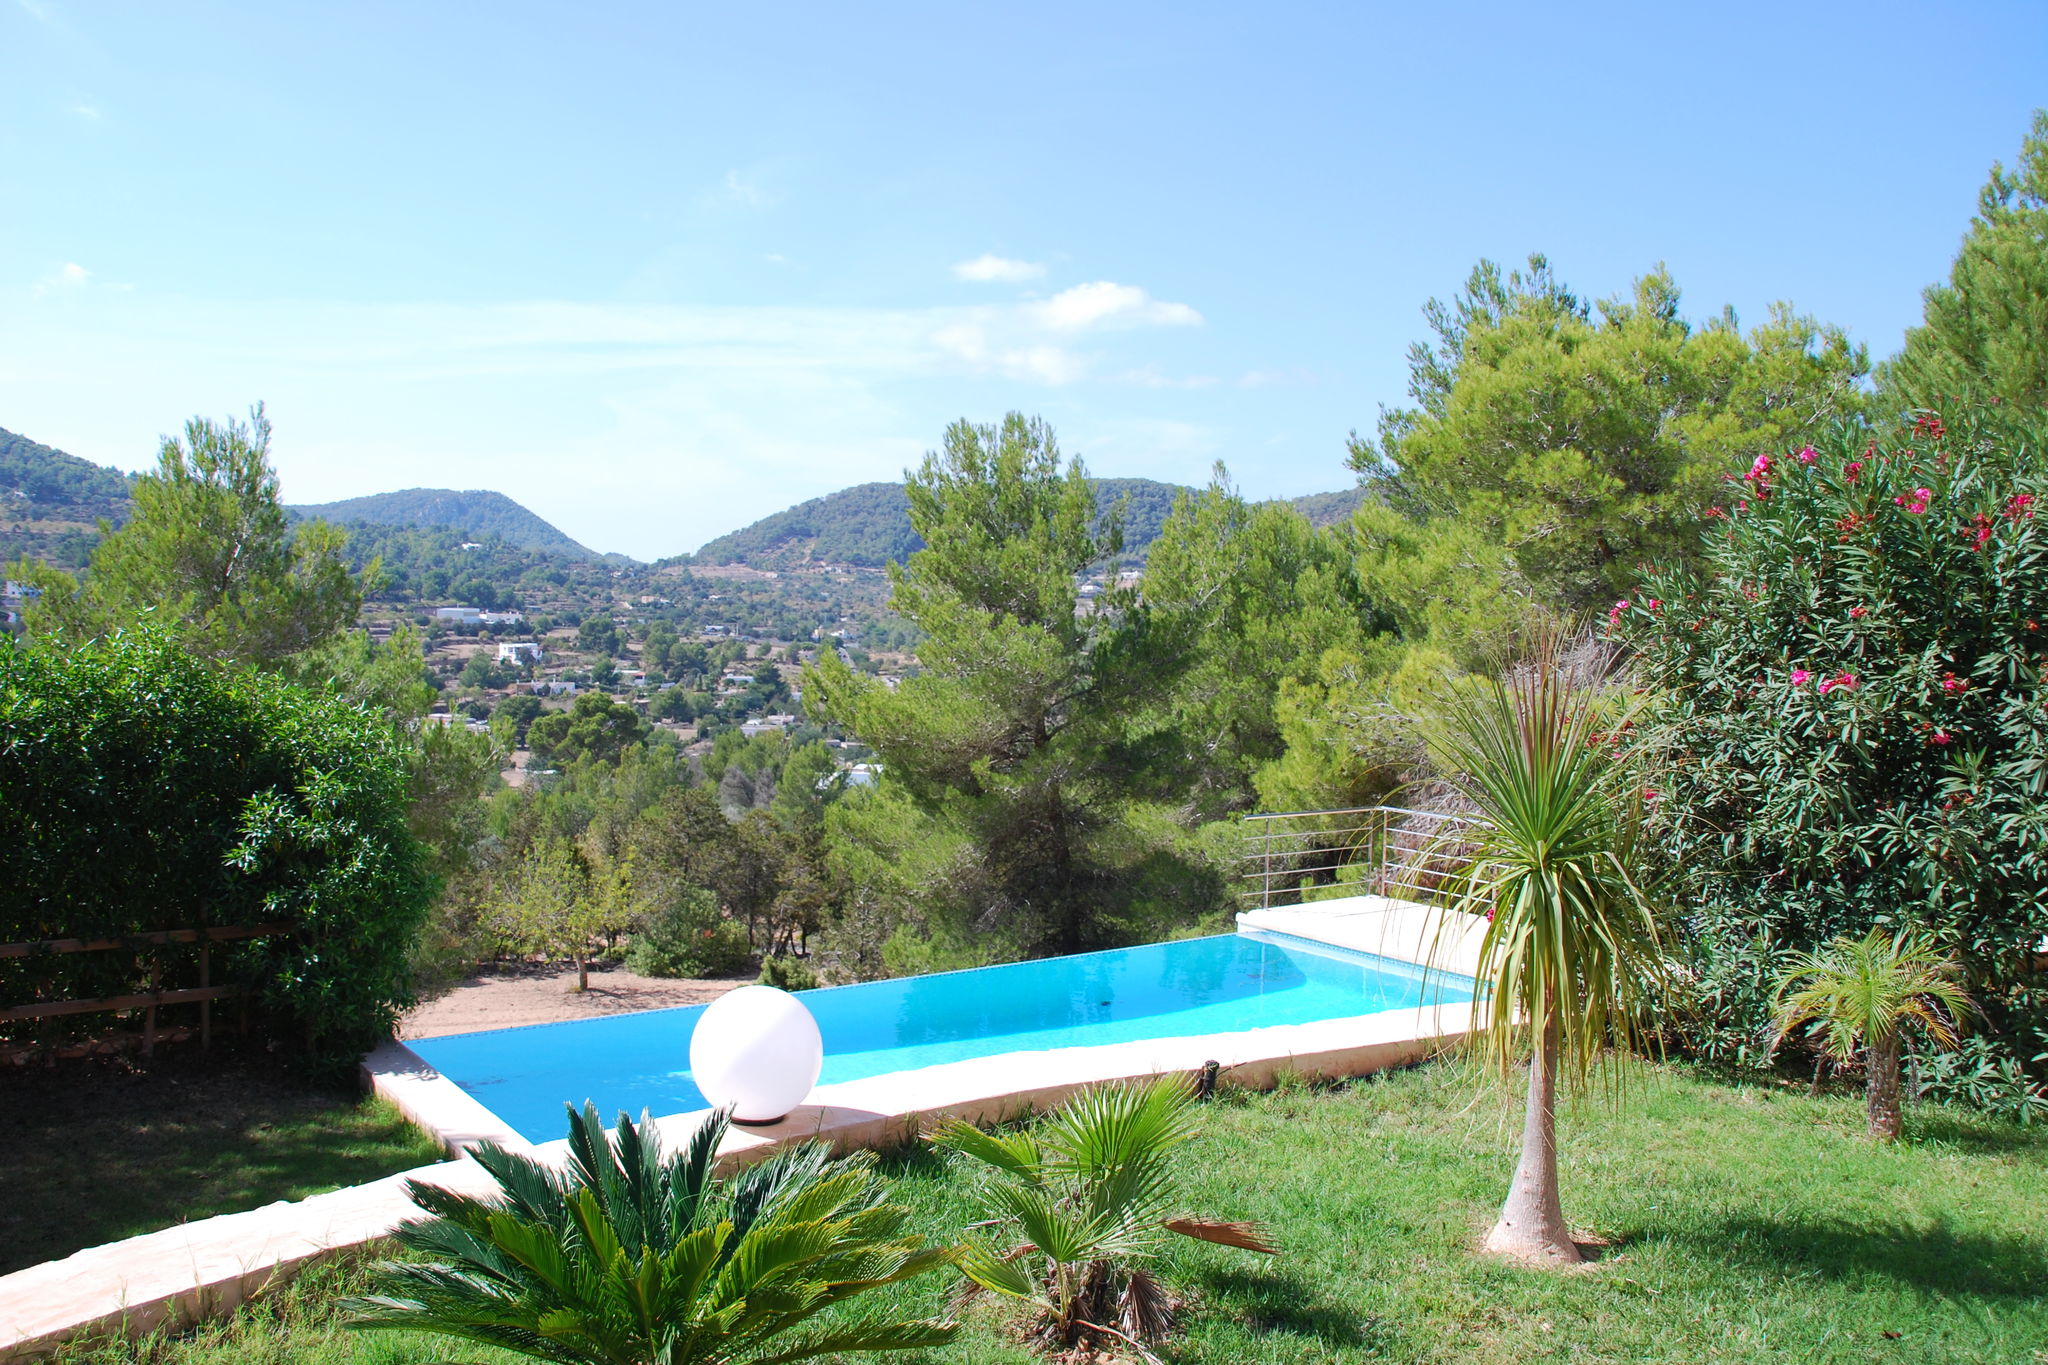 Detached villa in Ibiza with great views of the hills